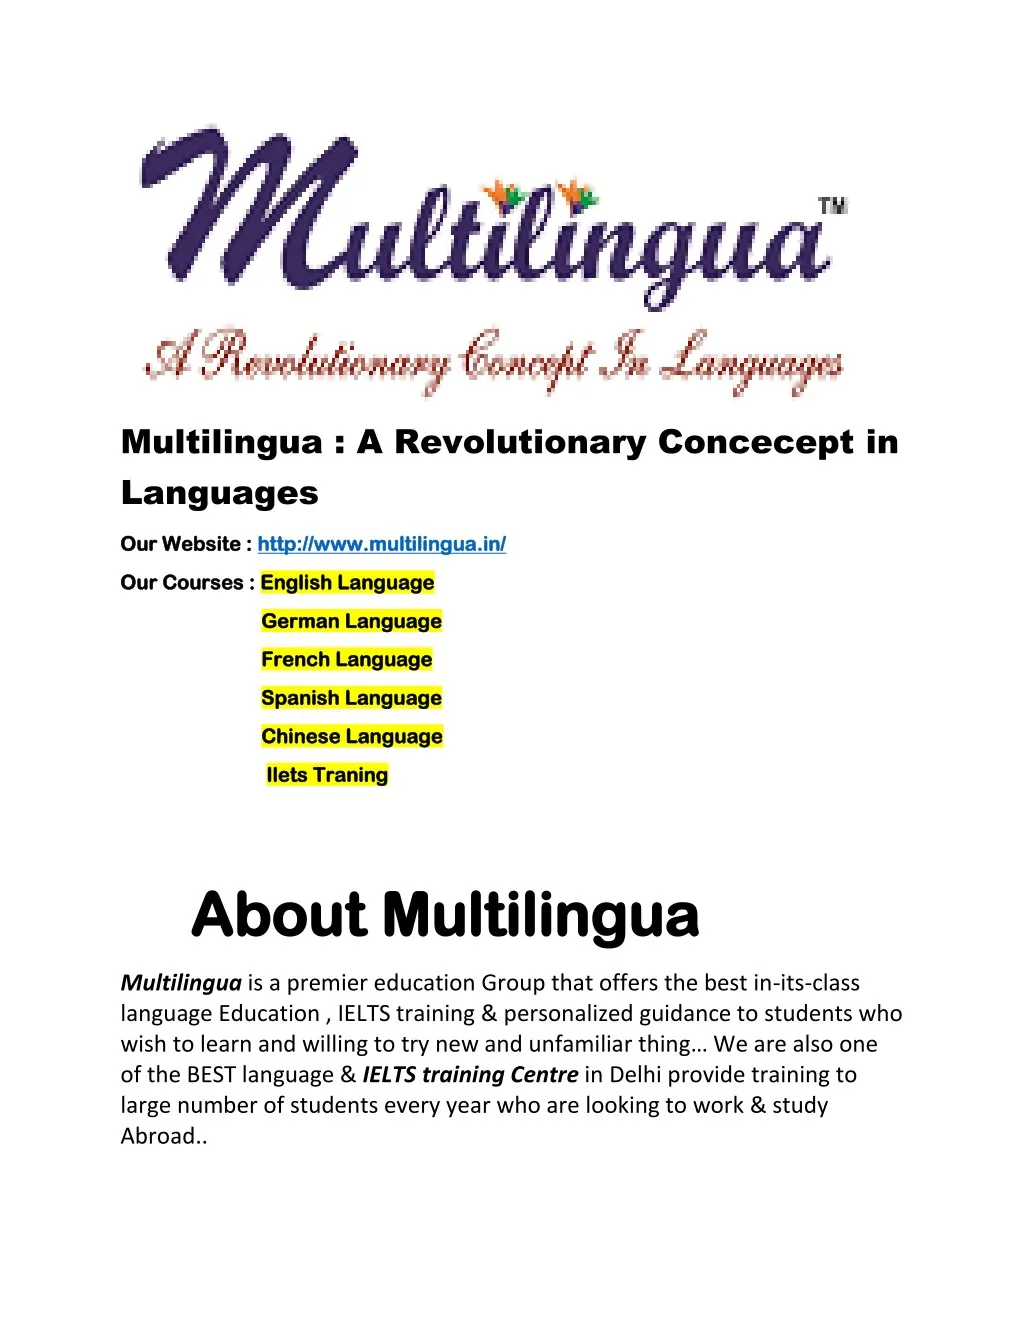 multilingua a revolutionary concecept in languages